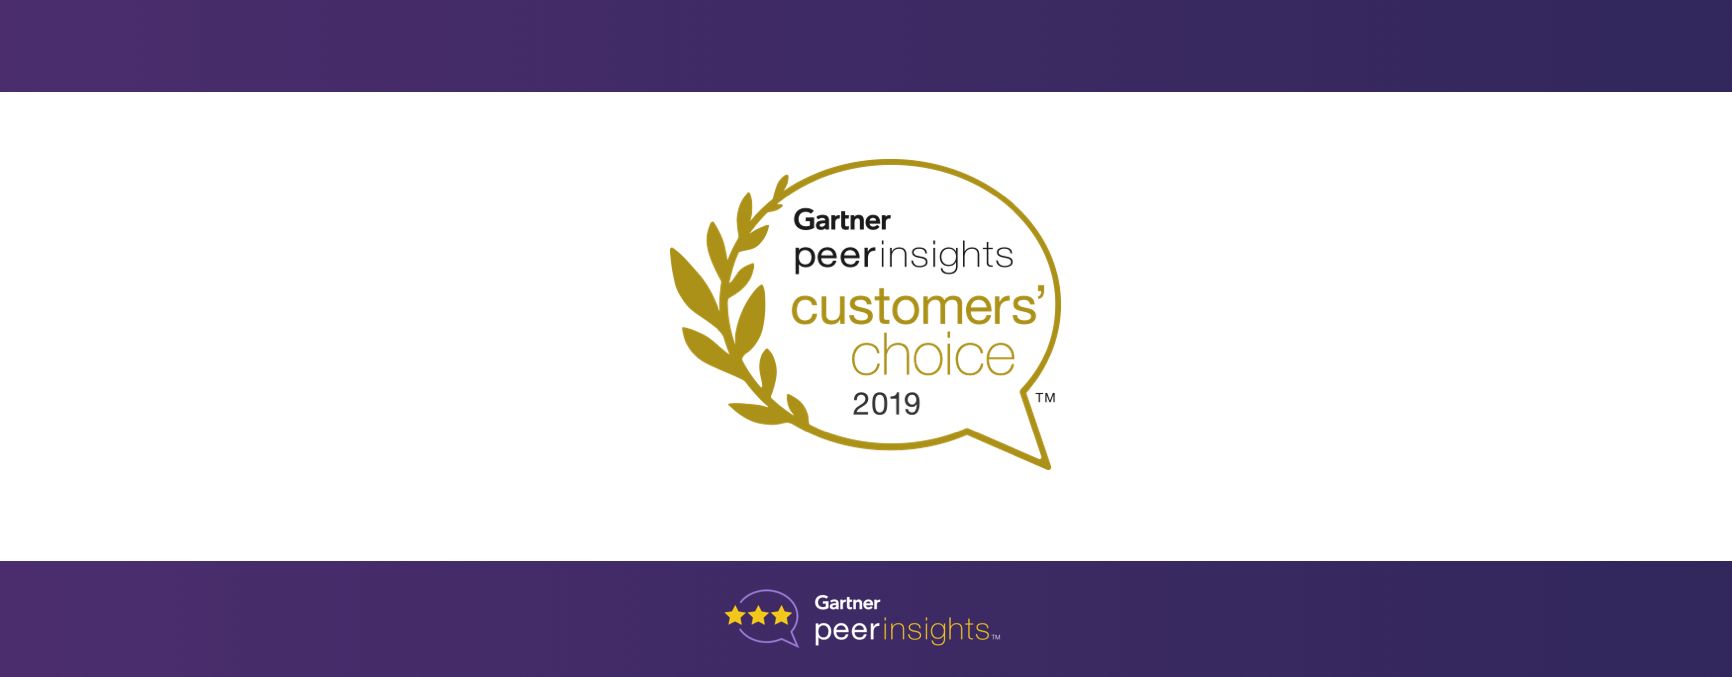 OneLogin Recognized Second Year in a Row by 2019 Gartner Customers’ Choice for Access Management as a Top Ranked Solution - Boasts Highest Overall Rating